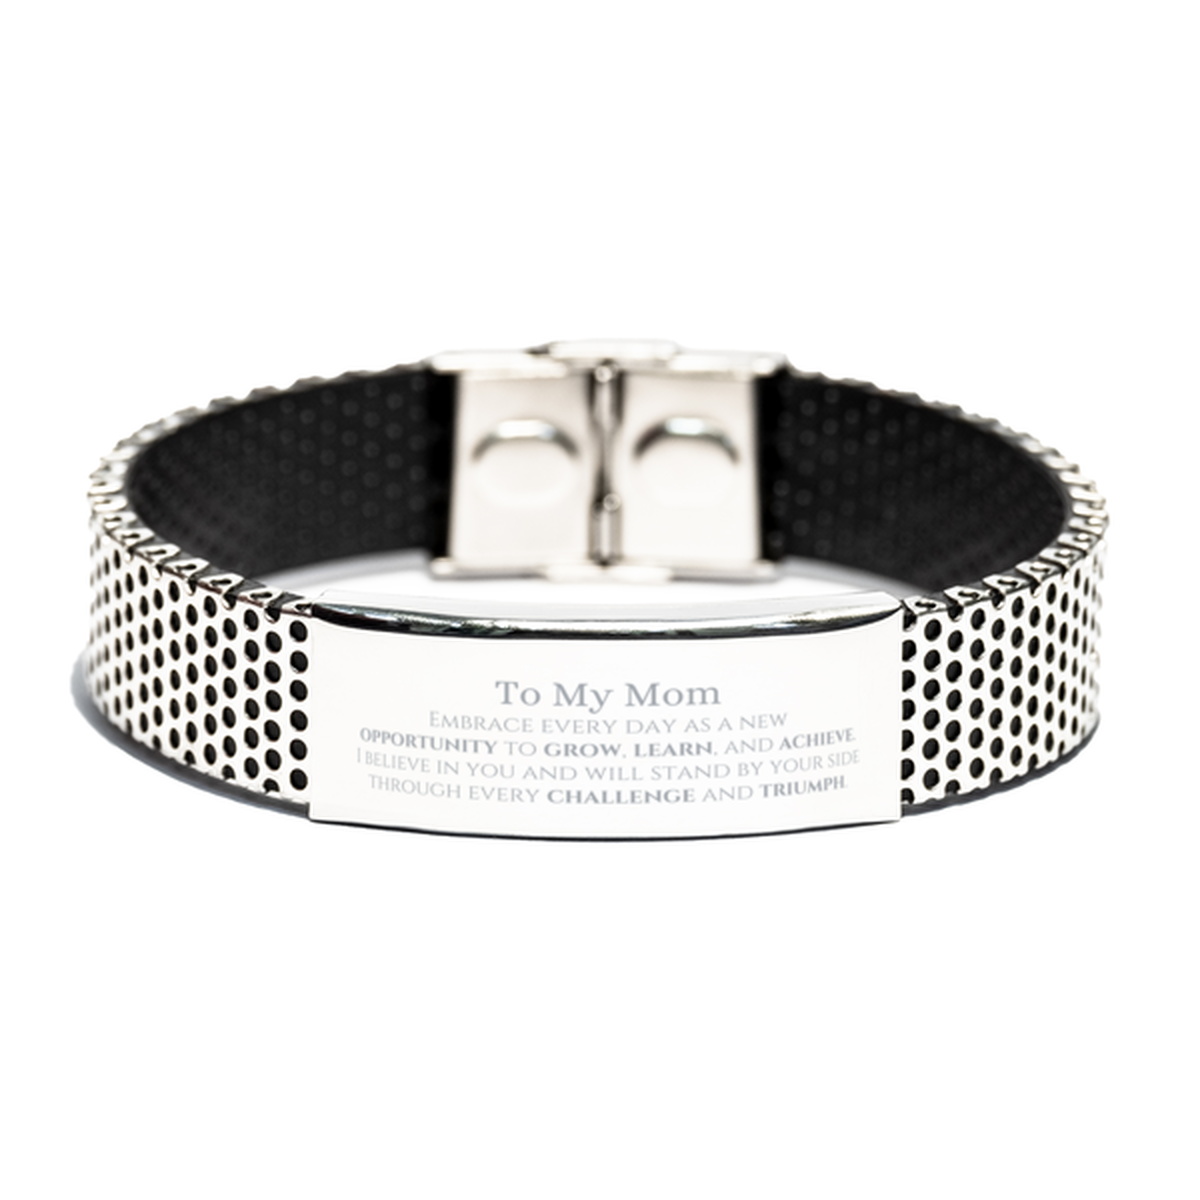 To My Mom Gifts, I believe in you and will stand by your side, Inspirational Stainless Steel Bracelet For Mom, Birthday Christmas Motivational Mom Gifts